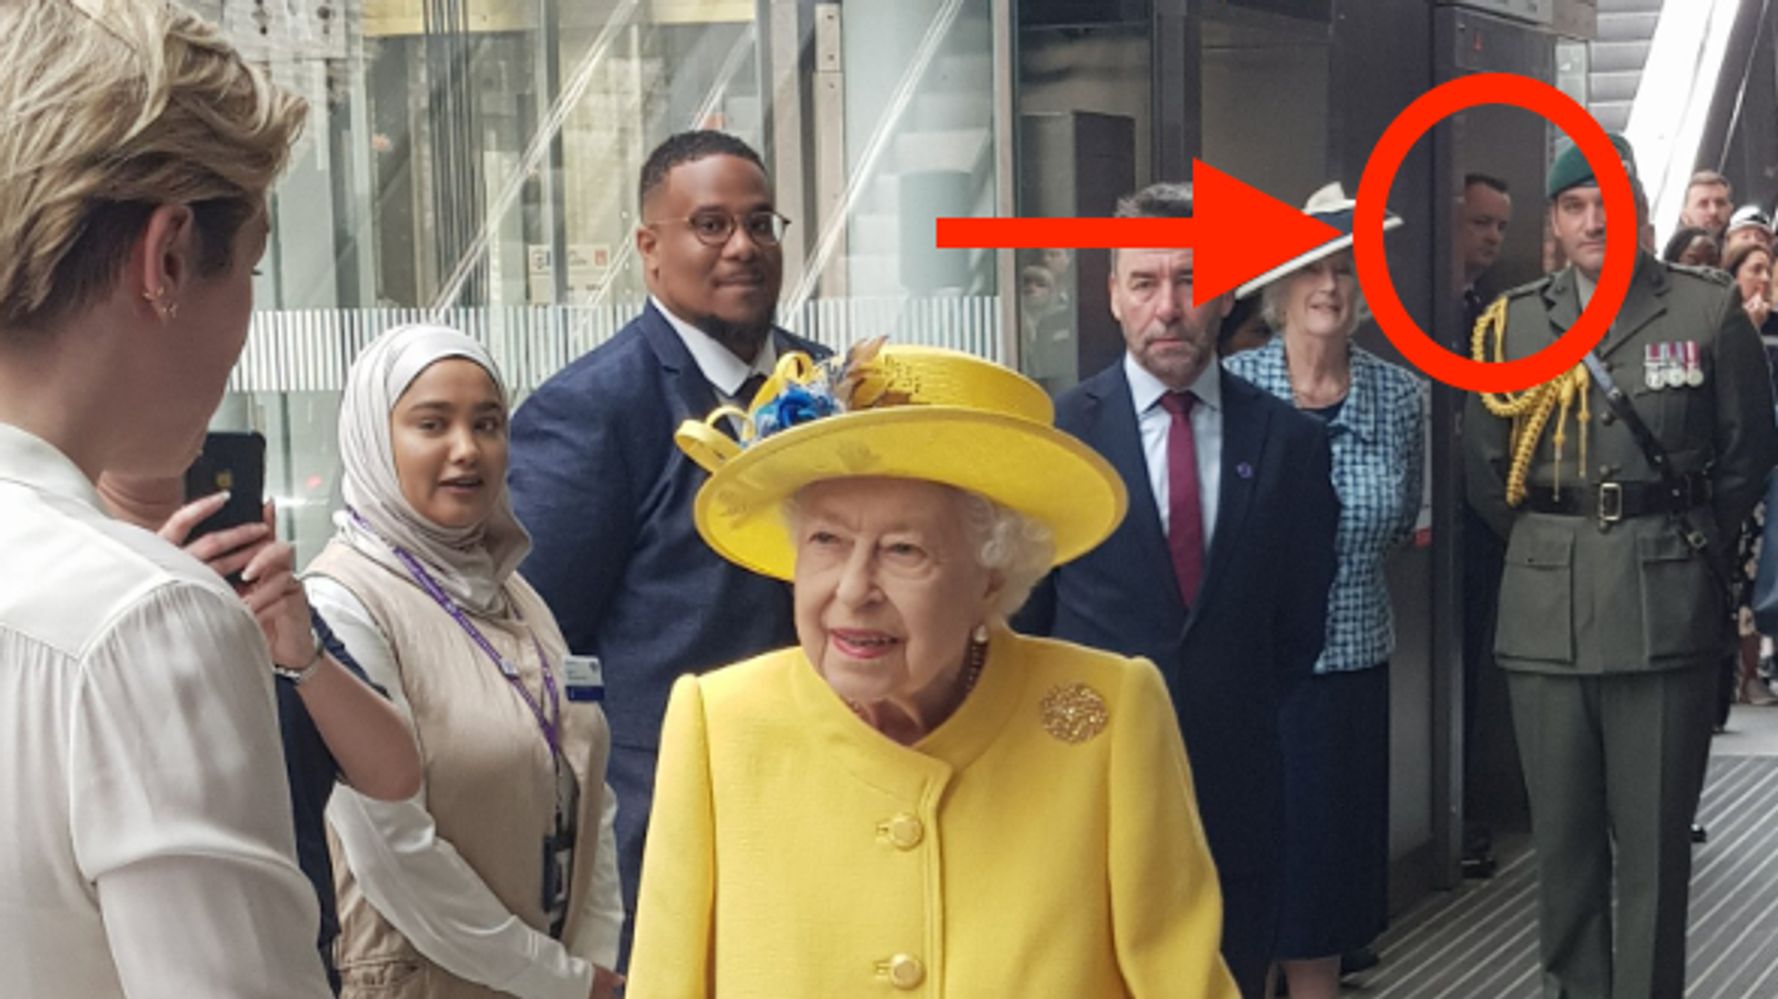 Is That Forrest Gump In The Background Of This Photo Of The Queen?